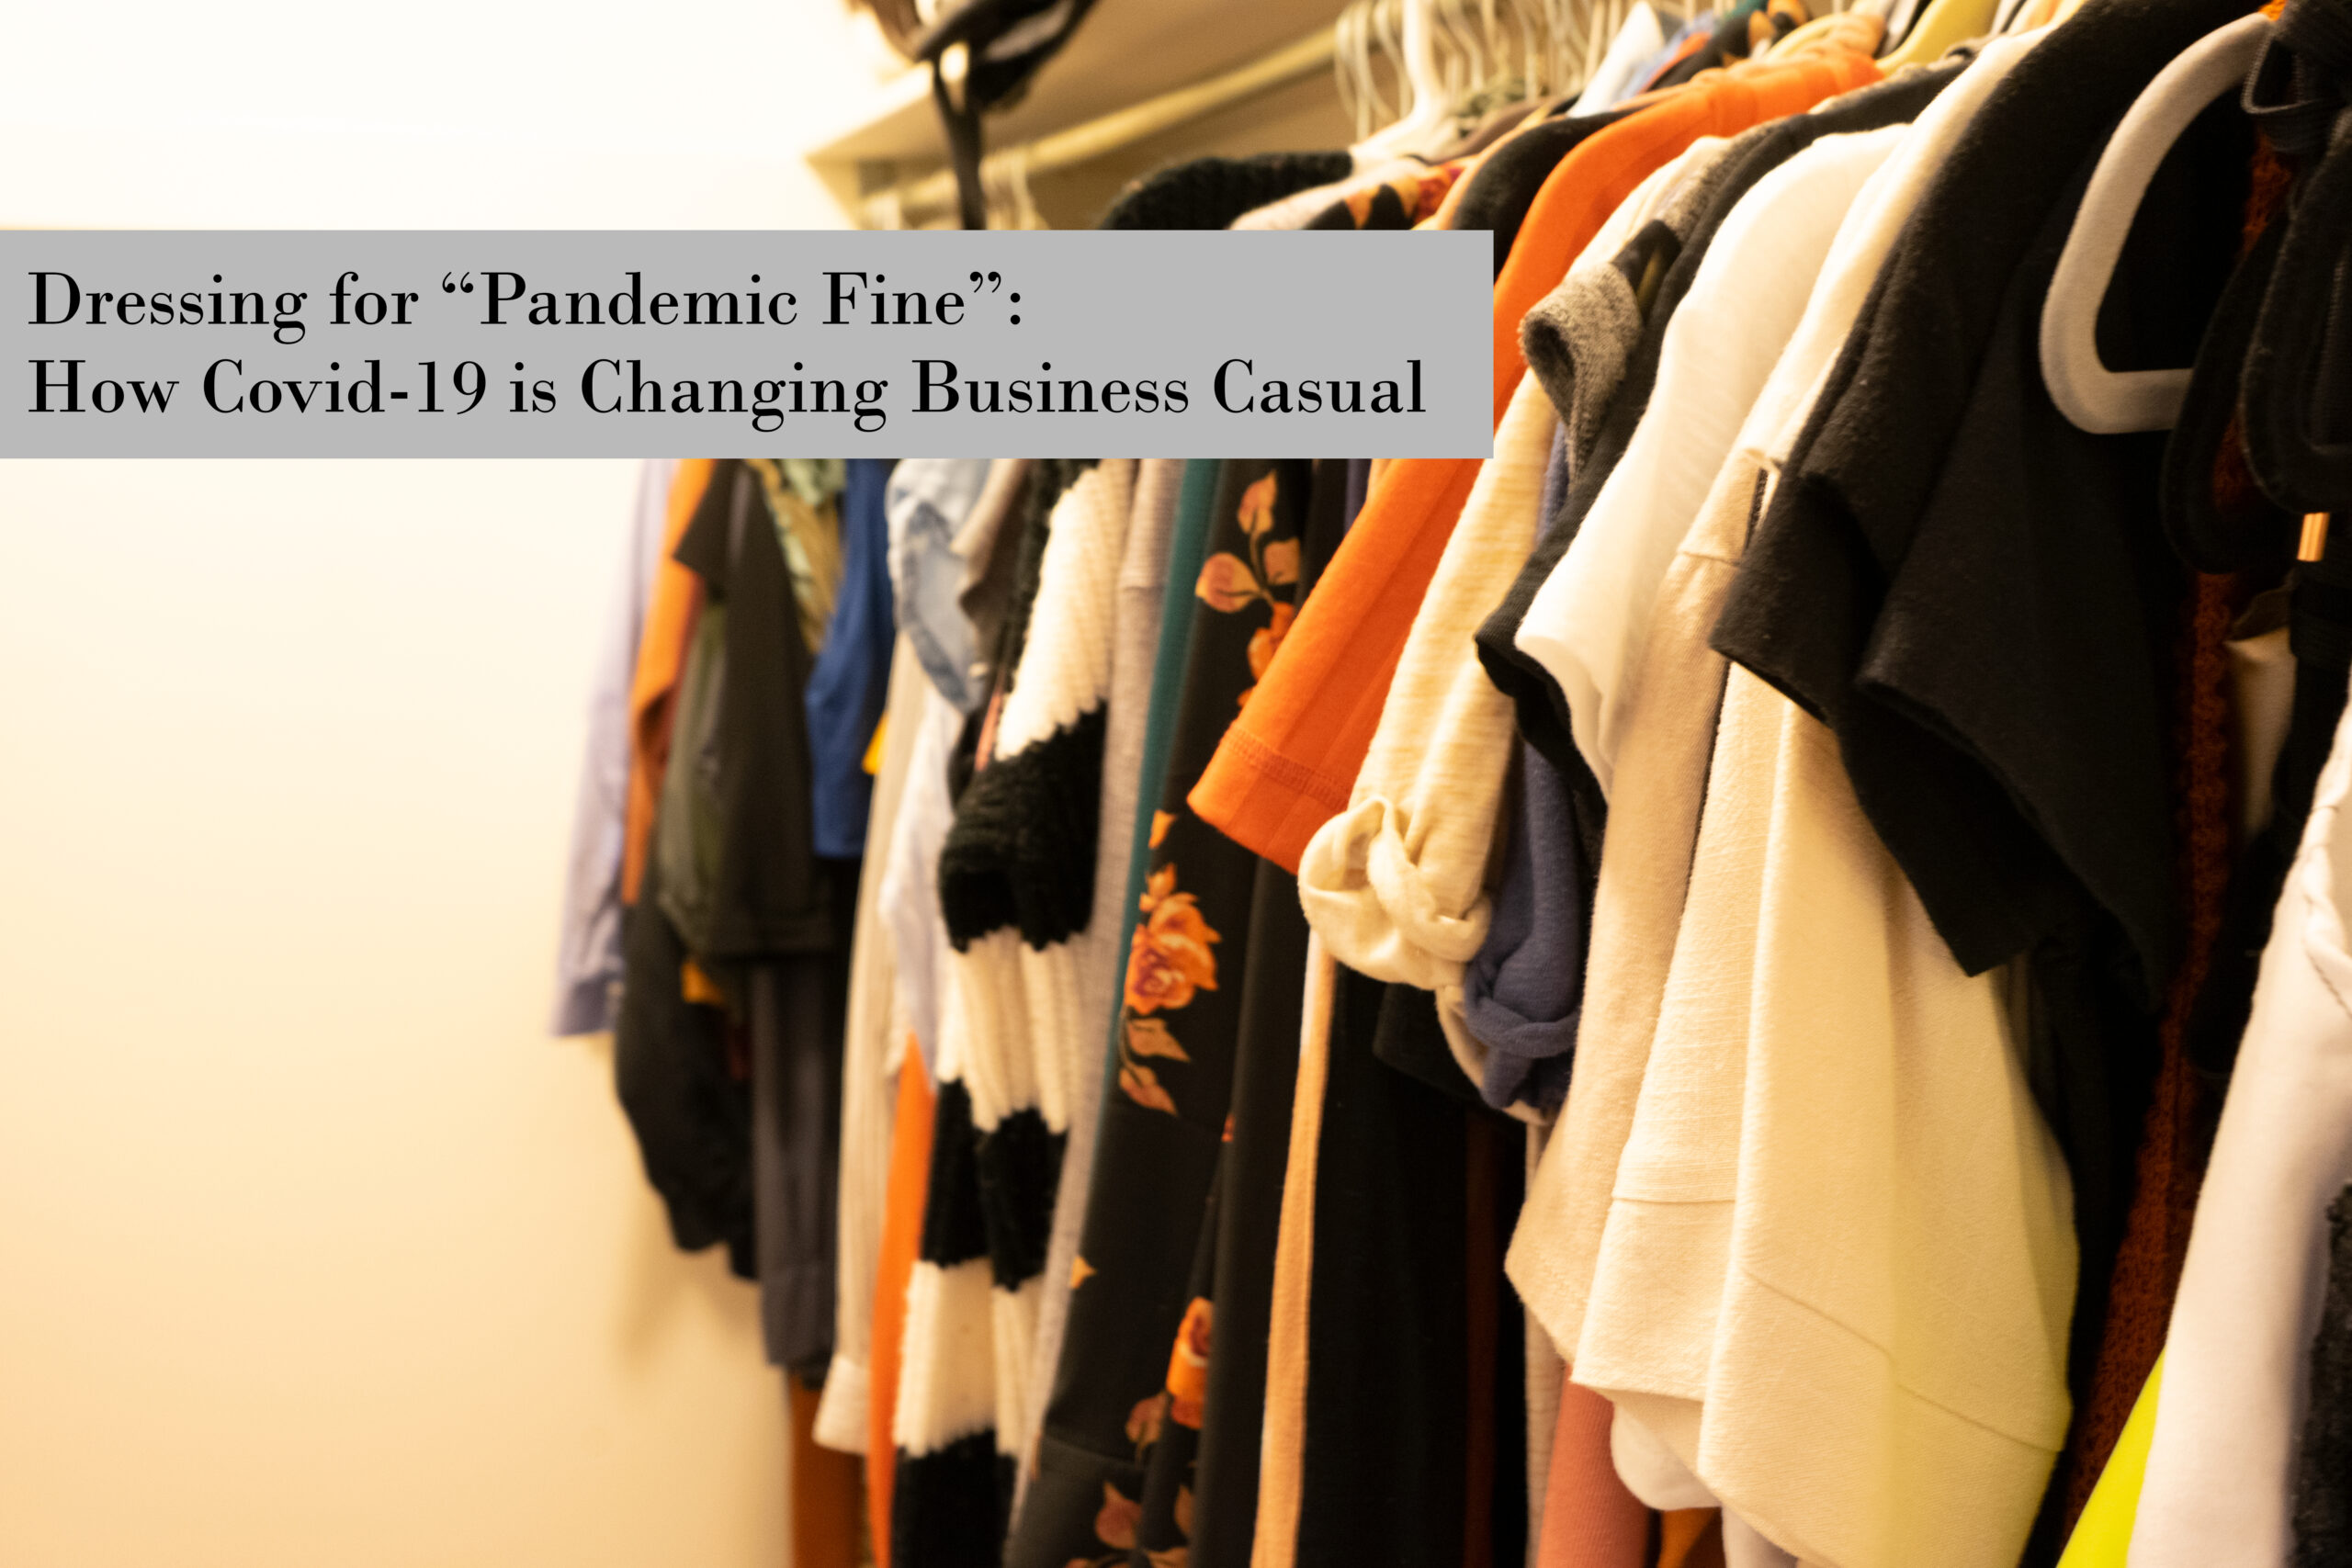 Dressing  for “Pandemic Fine”: How Covid-19 is Changing Business Casual